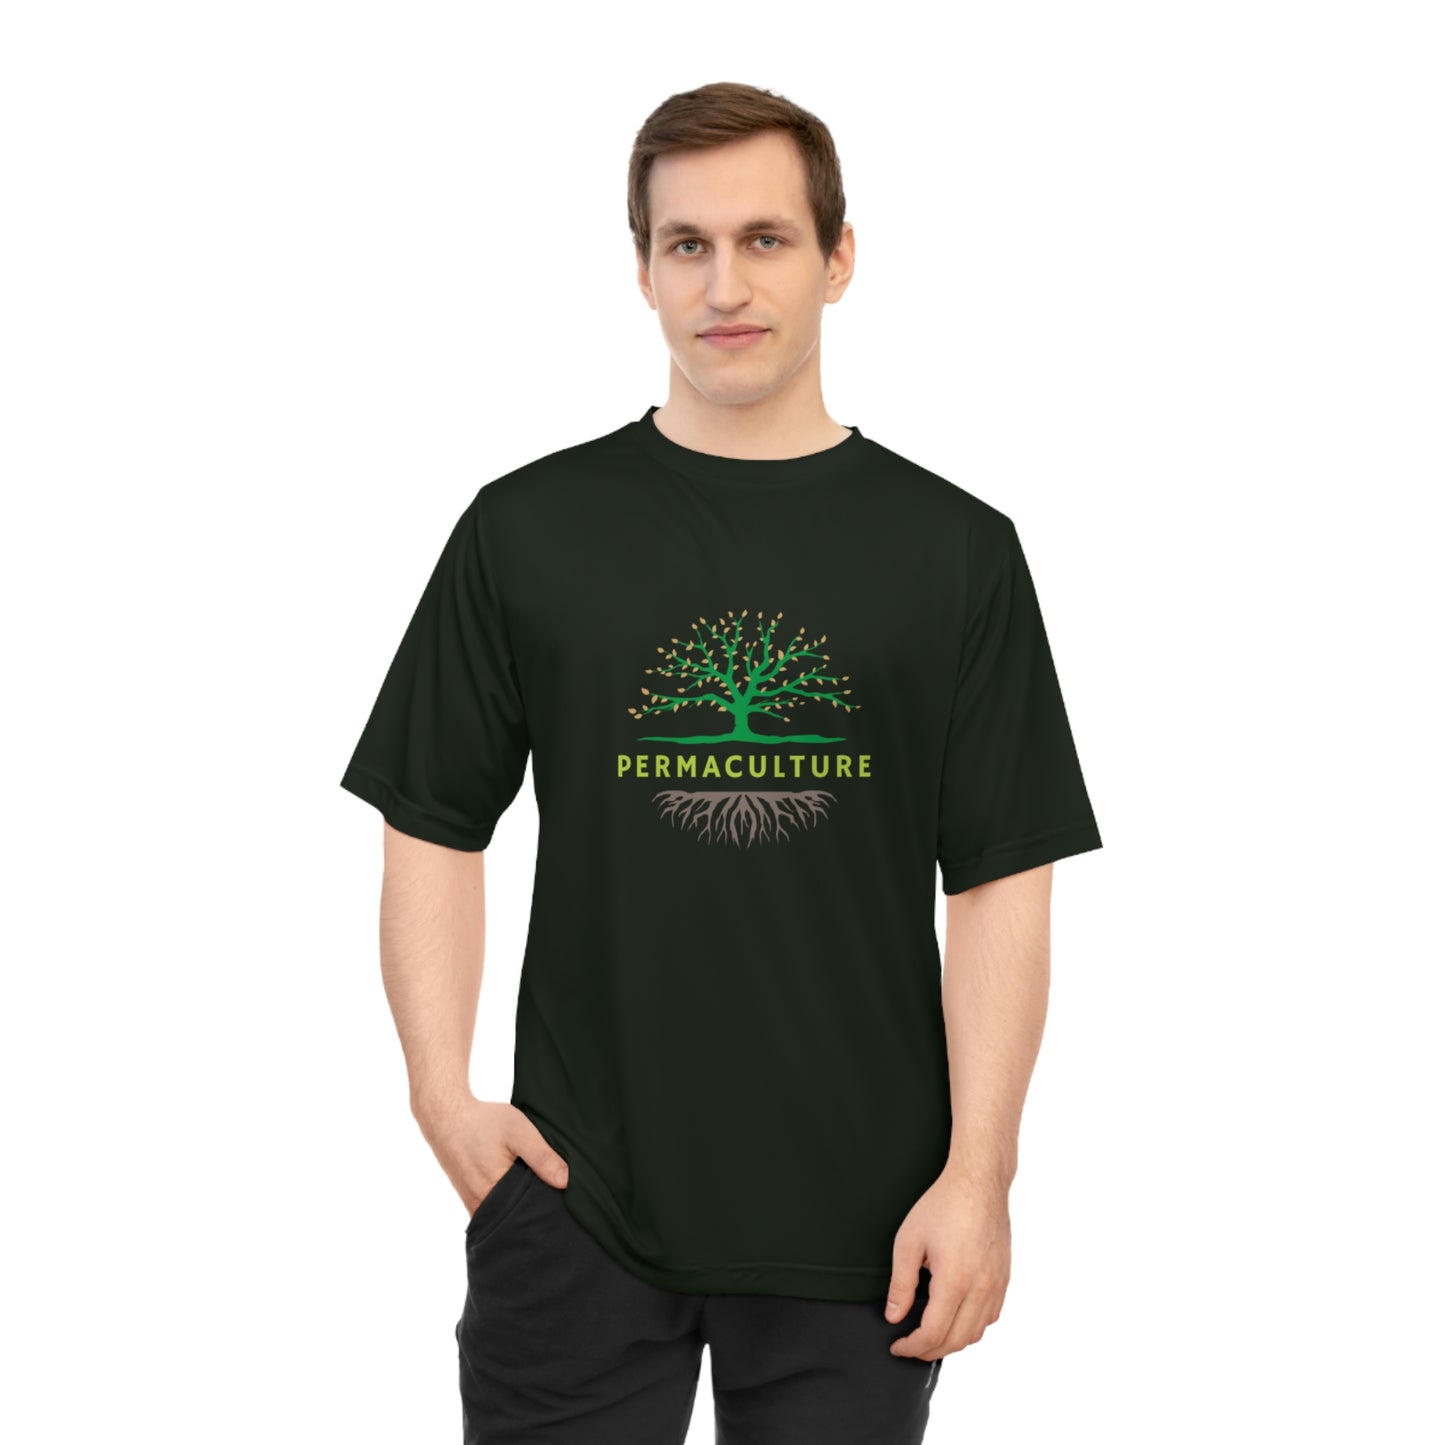 Permaculture - Unisex Zone Performance T-shirt